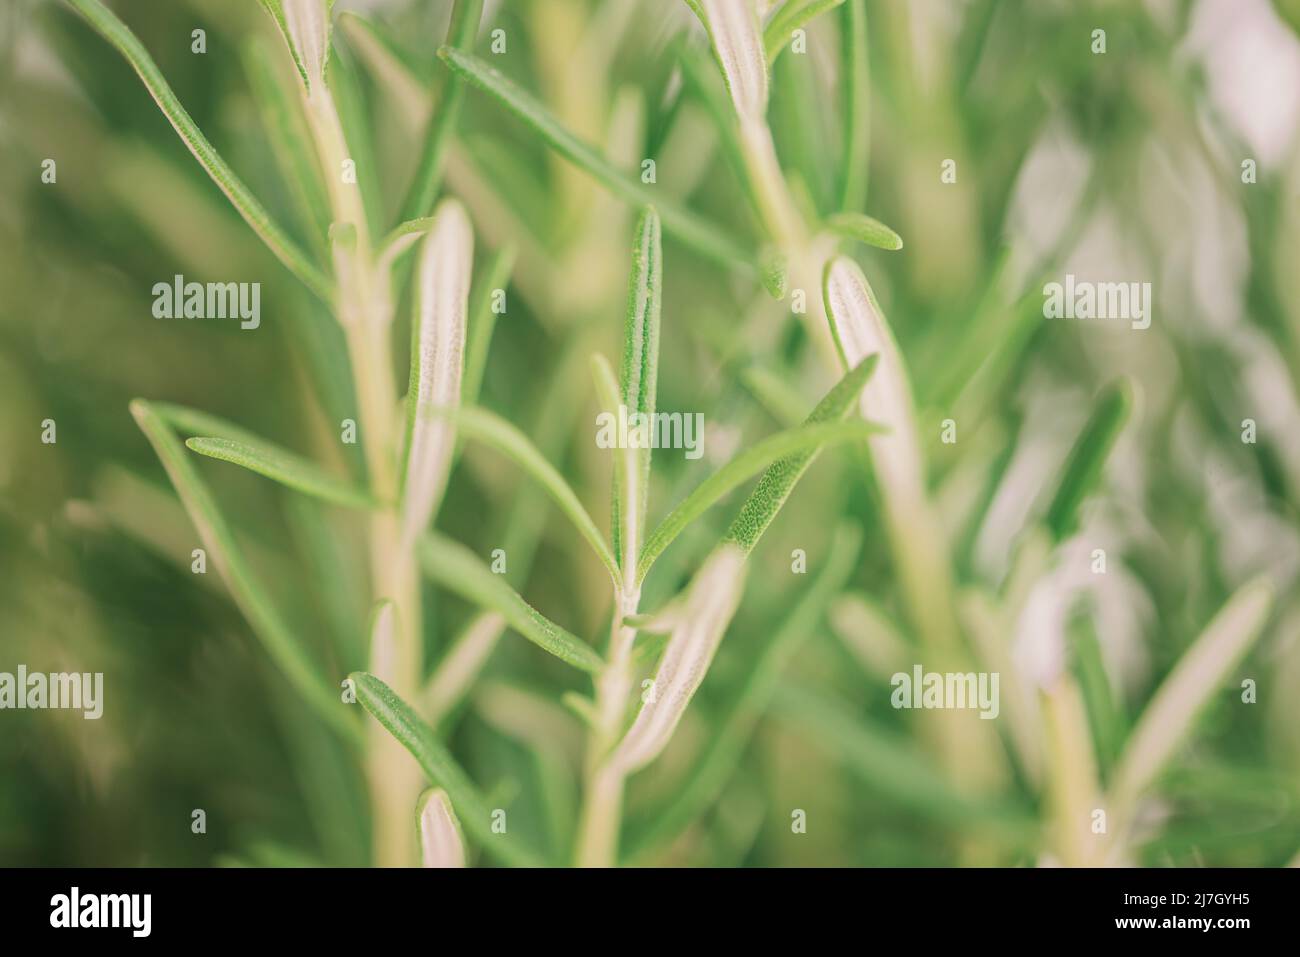 blurry green plant background, close-up view of rosemay plant Stock Photo